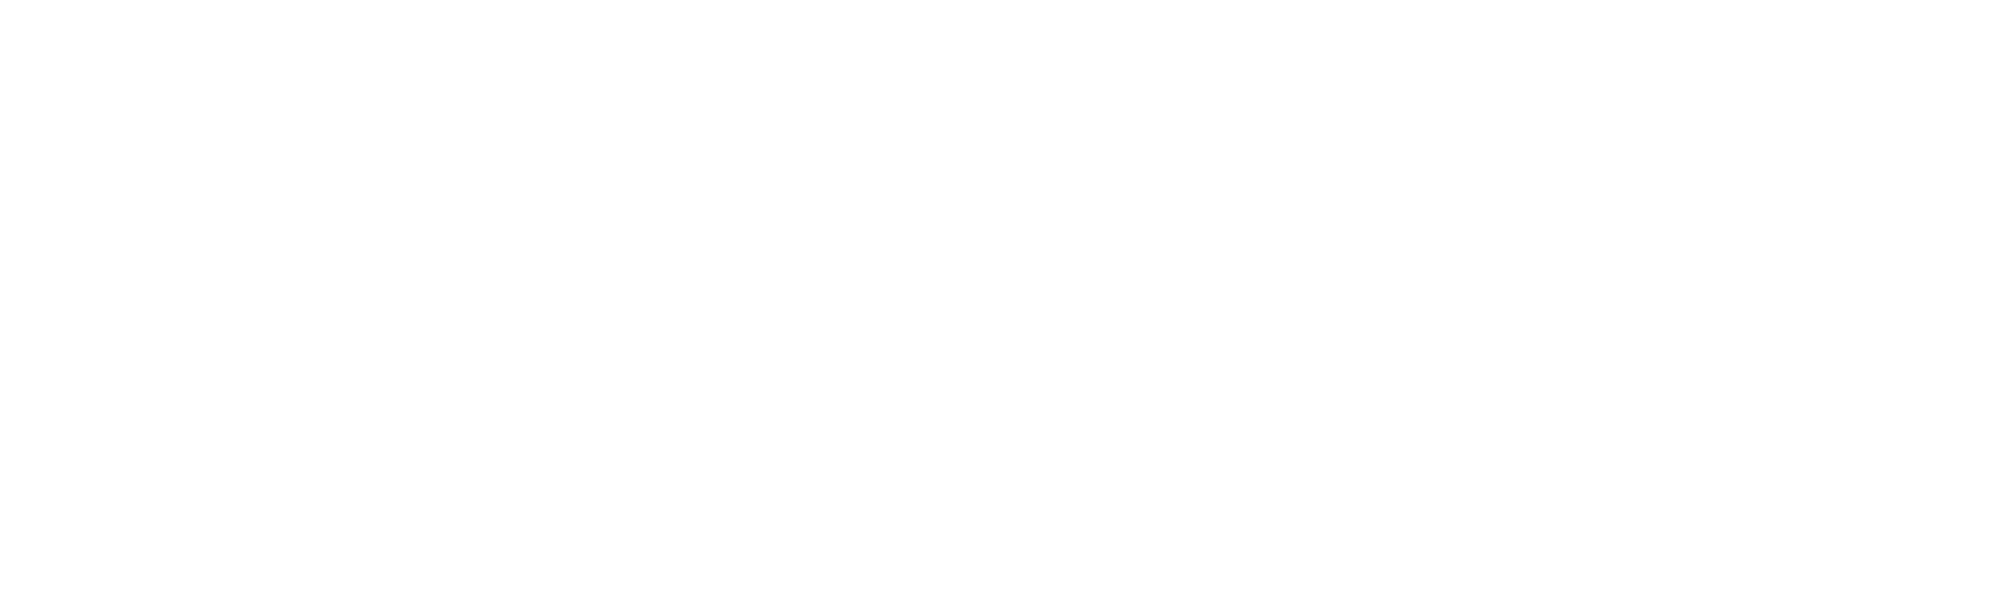 Overbrook Brothers, The